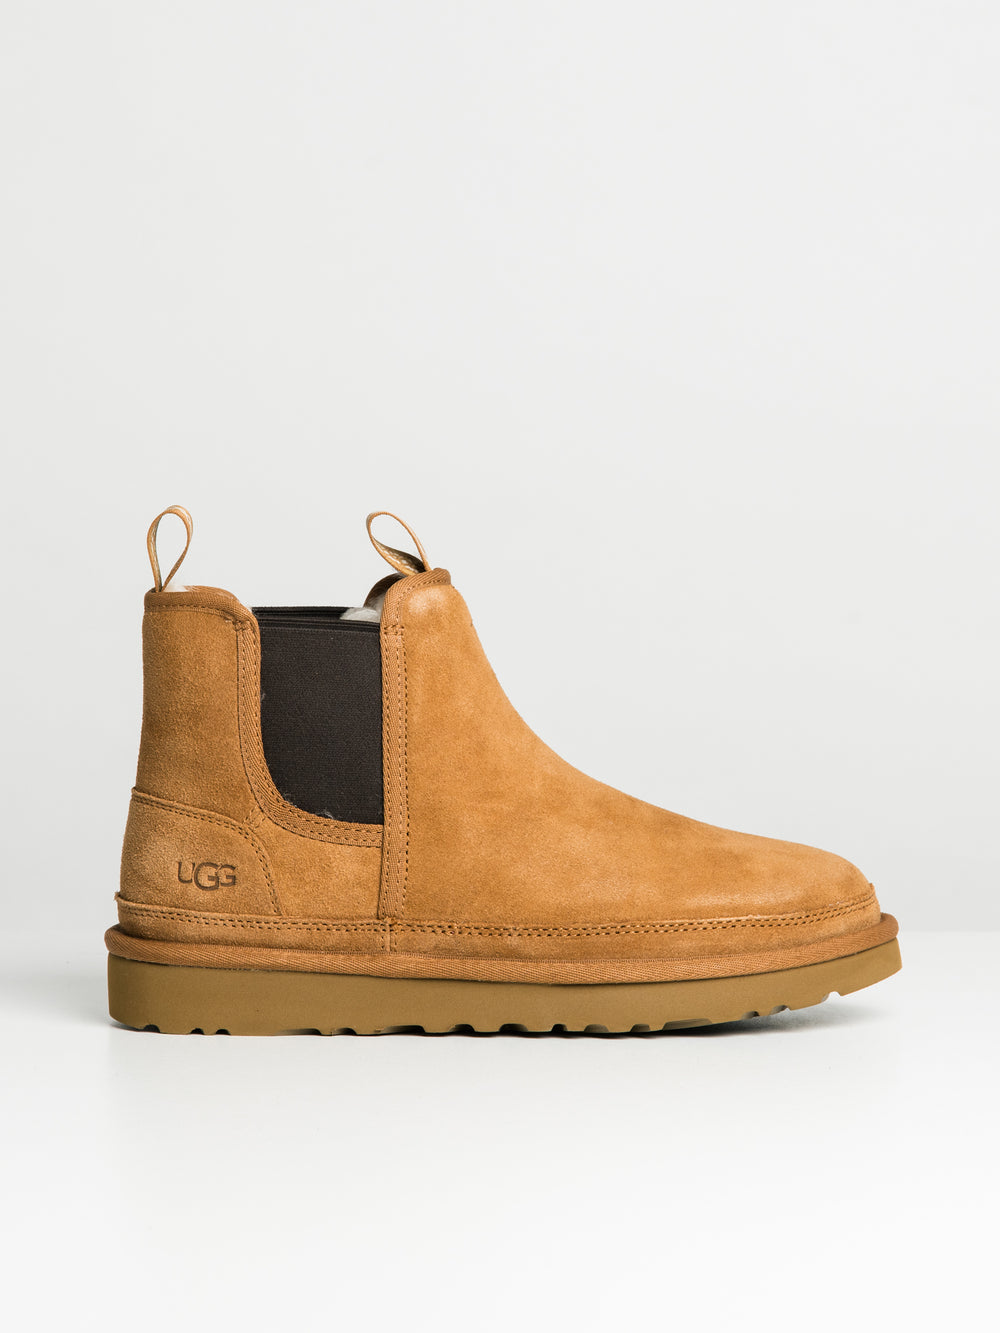 MENS UGG NEUMEL CHELSEA BOOT - CLEARANCE